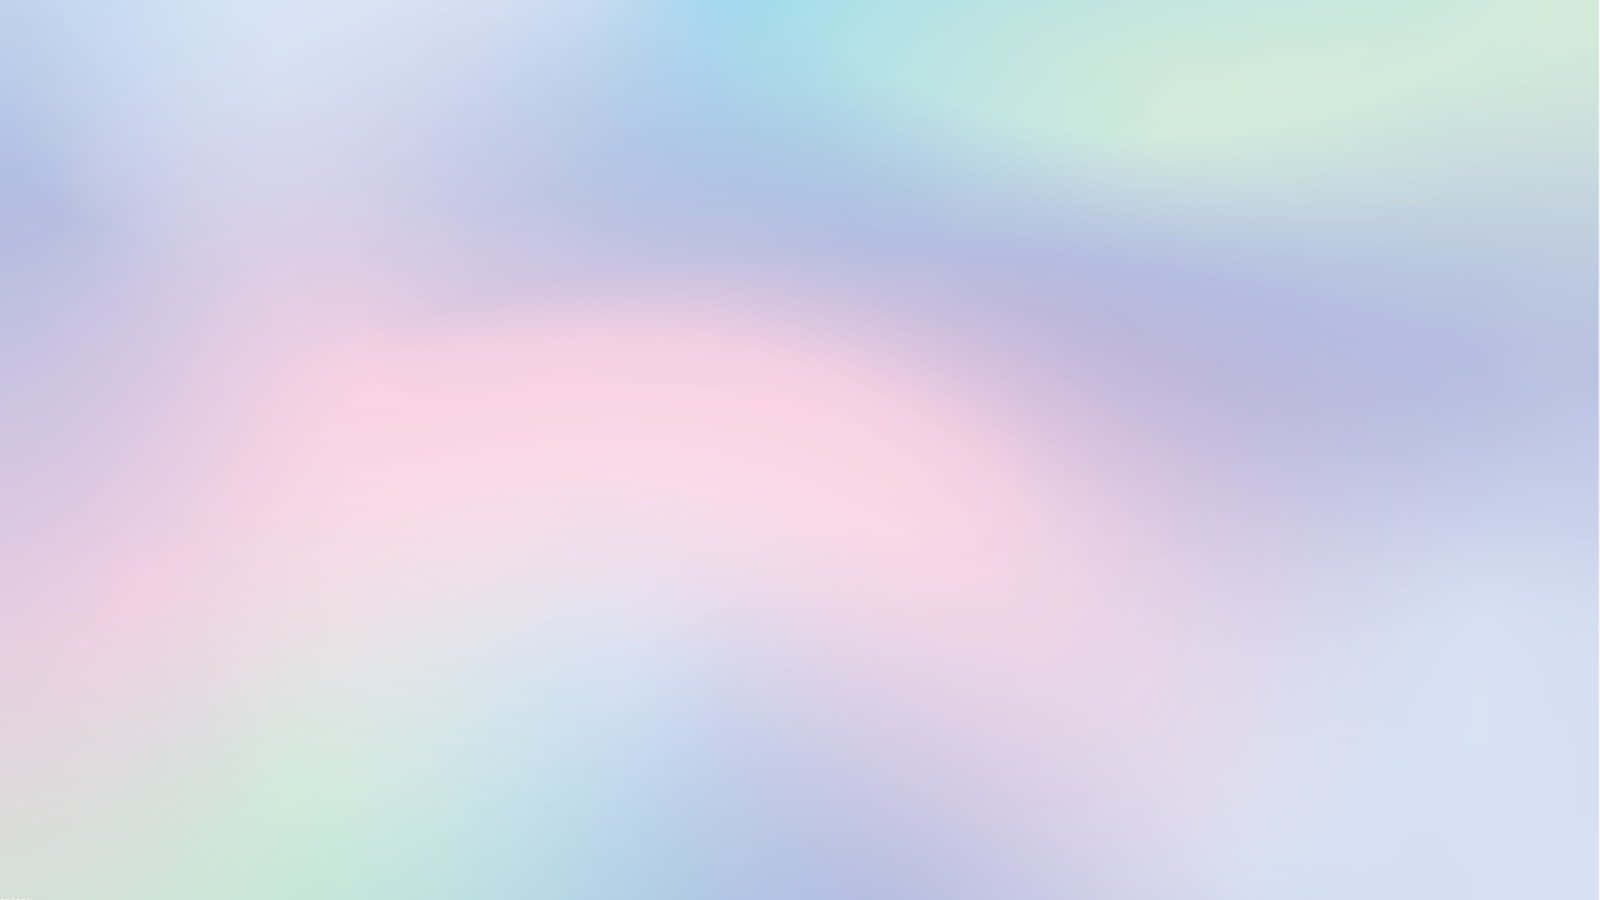 A Blurry Background With Pastel Colors